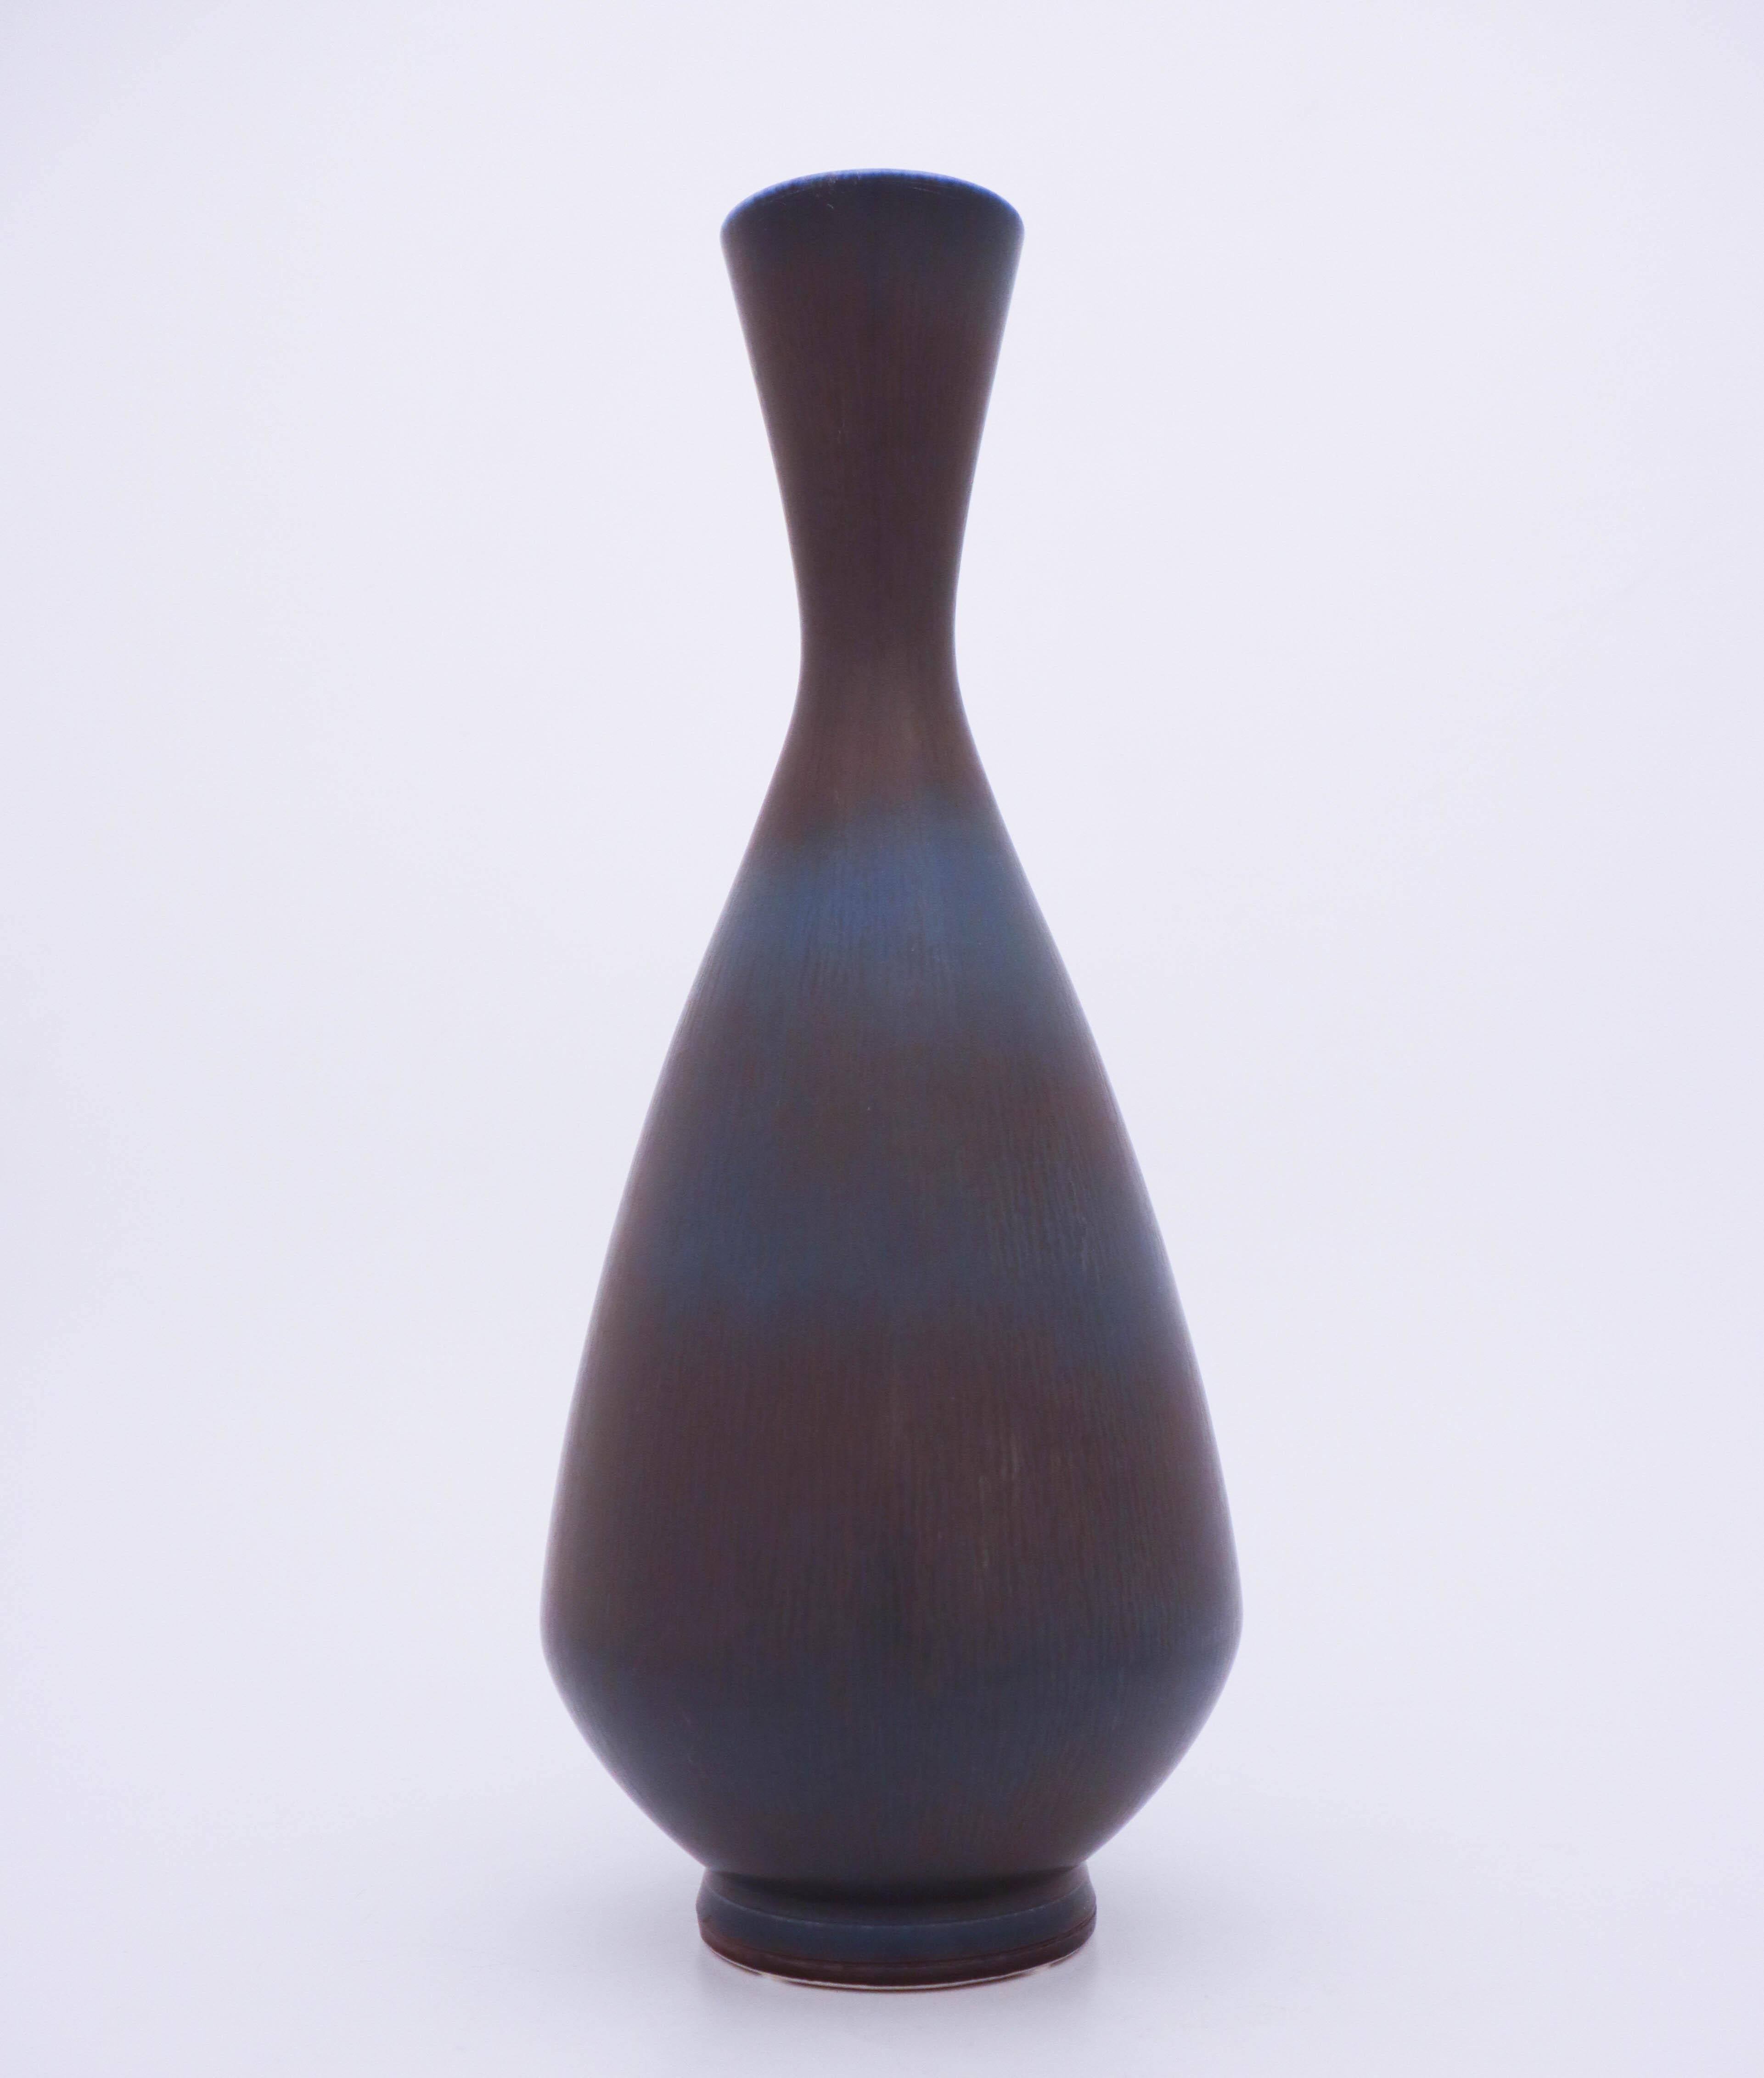 A blue vase designed by Berndt Friberg at Gustavsberg in Stockholm, the vase is 37.5 cm high and 15 cm in diameter. It has a beautiful hare’s fur glaze and marked as on picture. This vase was produced in 1962, it´s in mint condition!